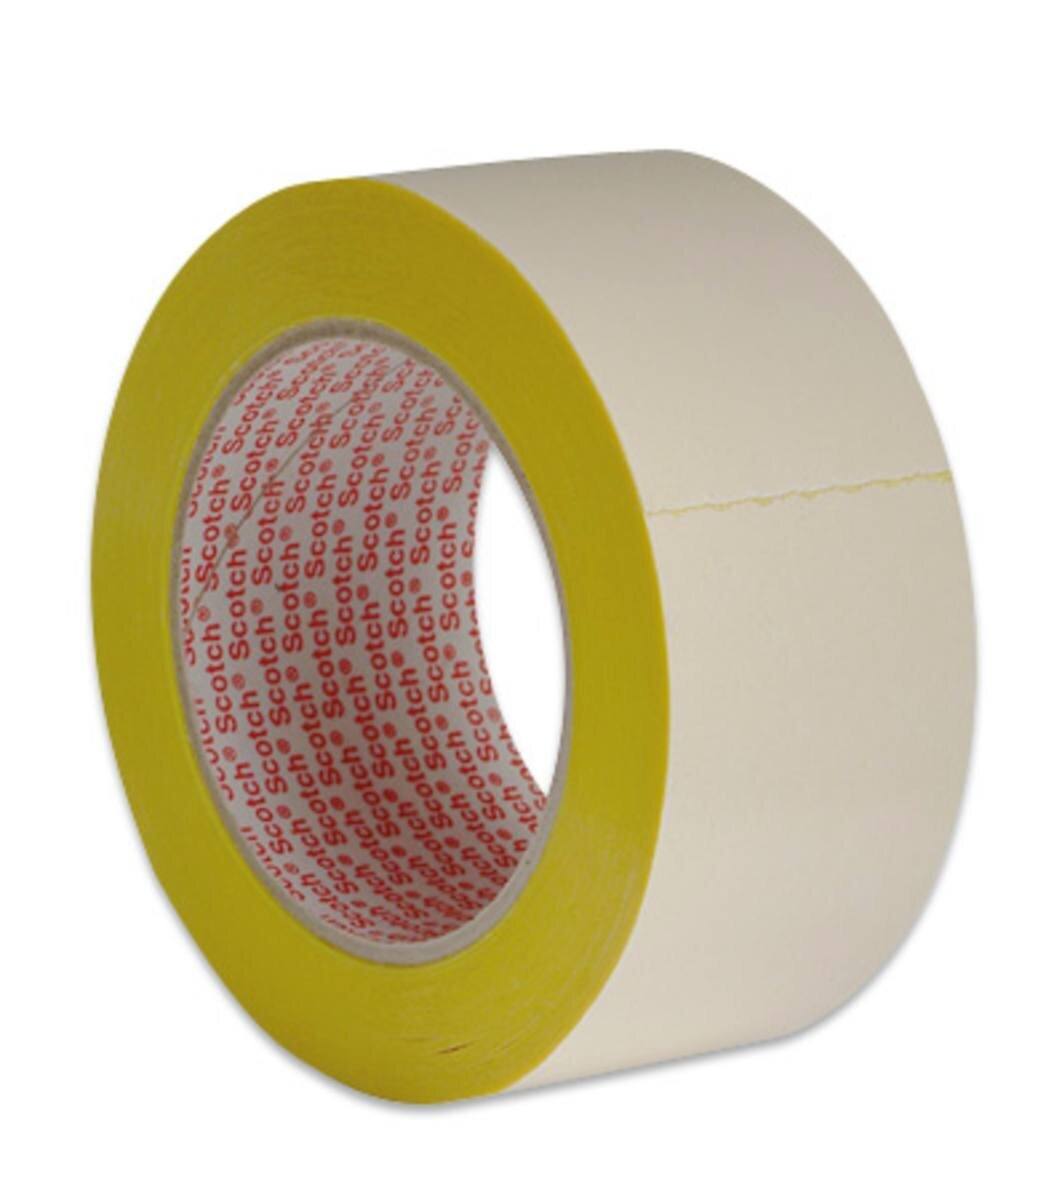 3M Double-sided adhesive tape with polypropylene backing 9195, yellow, 50 mm x 25 m, 0.13 mm